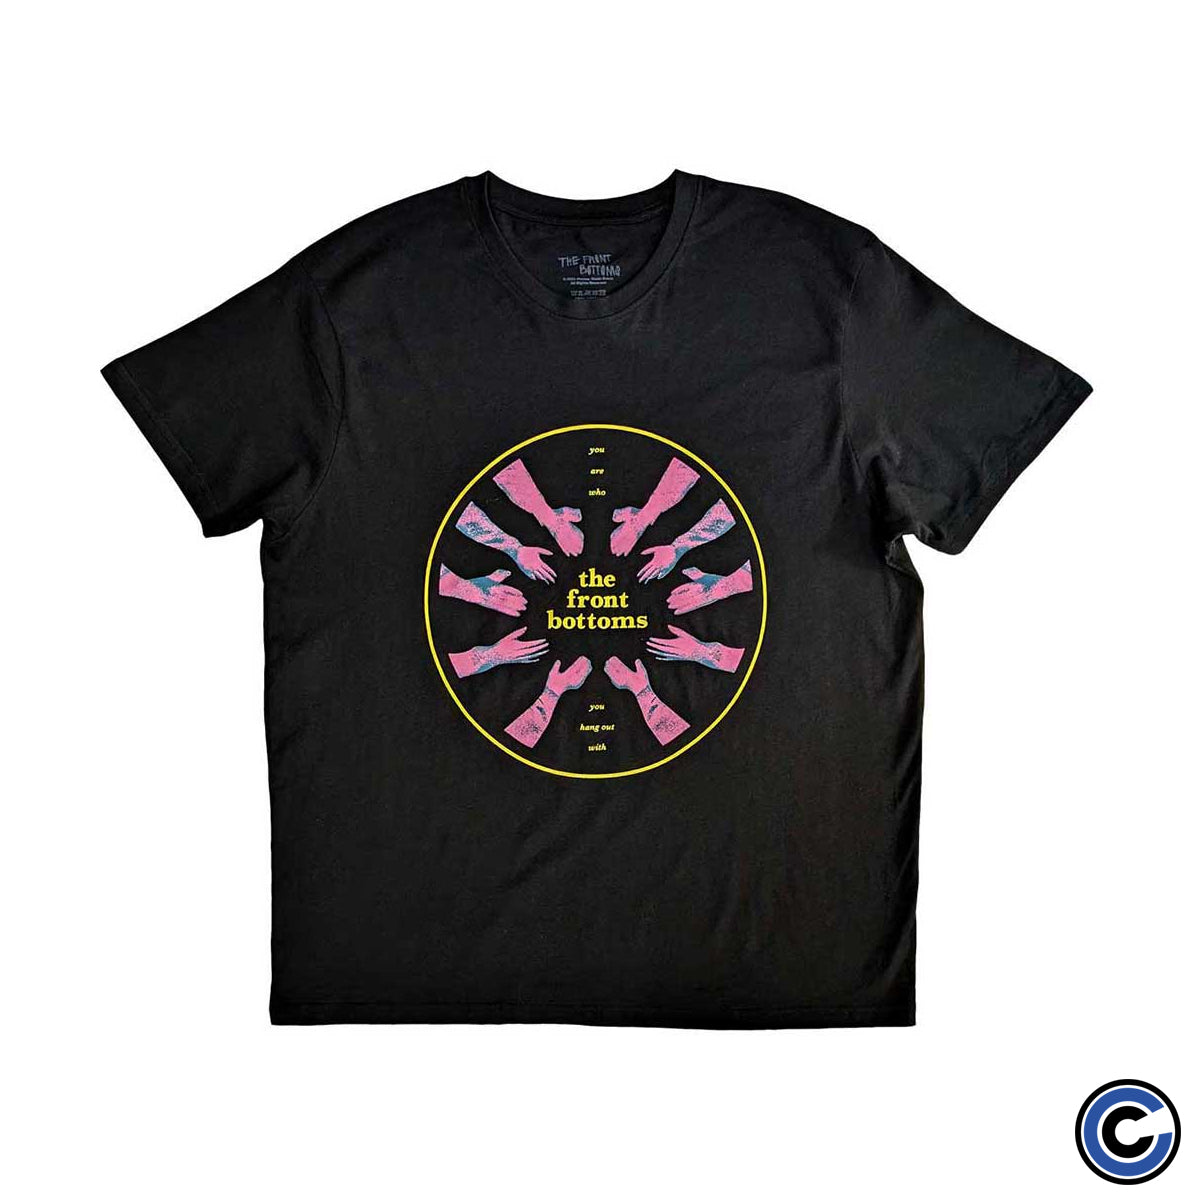 The Front Bottoms "Circle Hands" Shirt